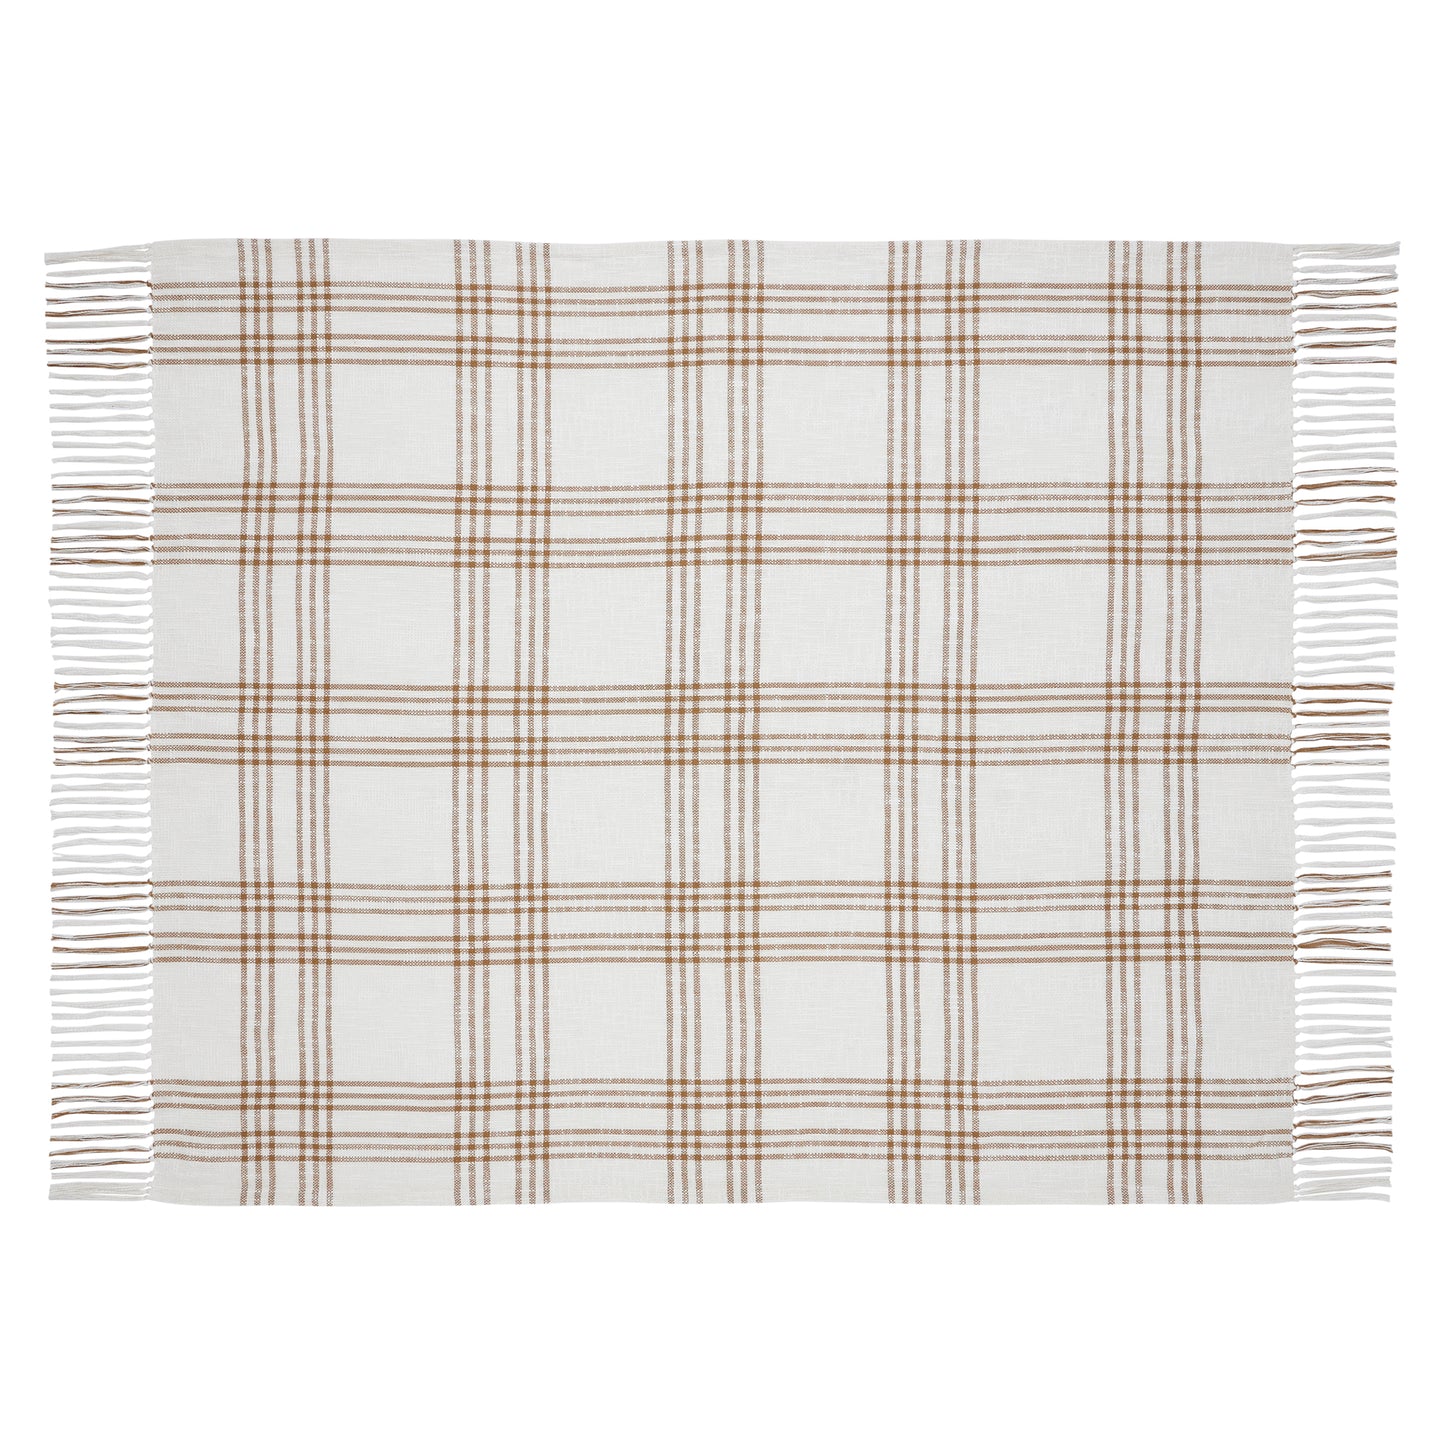 Wheat Plaid Woven Blanket Laid out